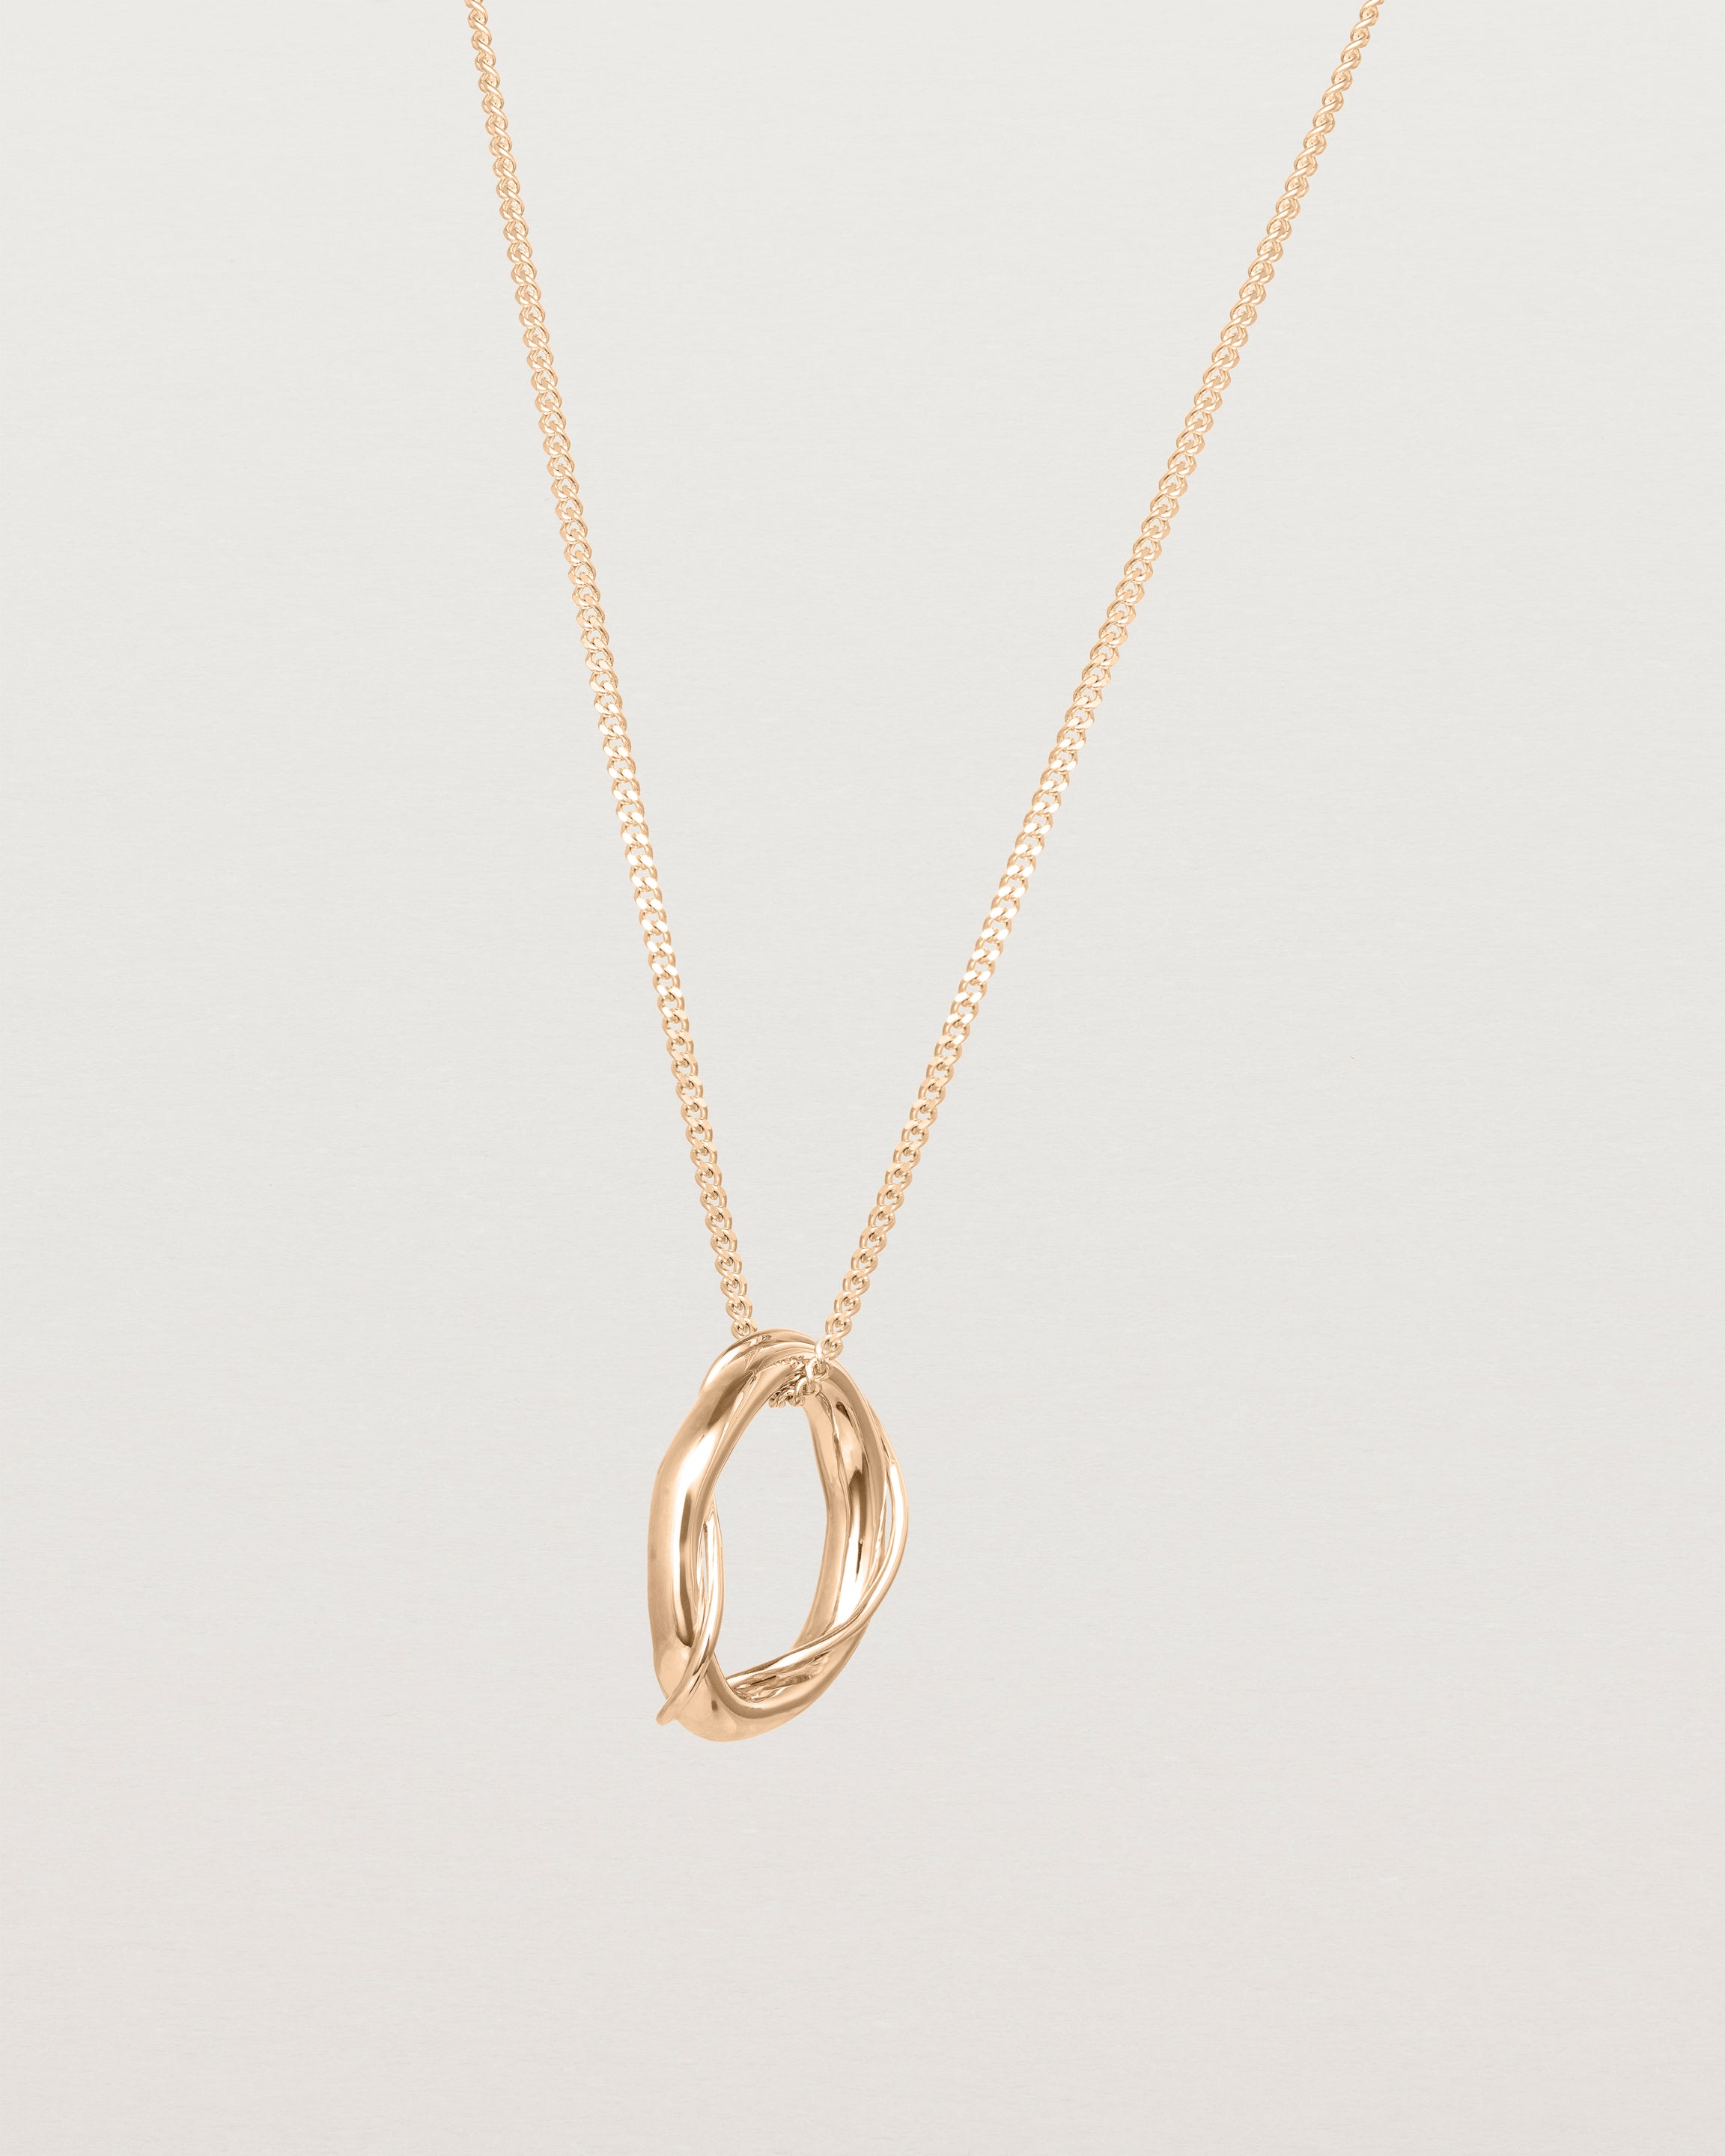 Angled view of the Petite Dalí Necklace in rose gold.